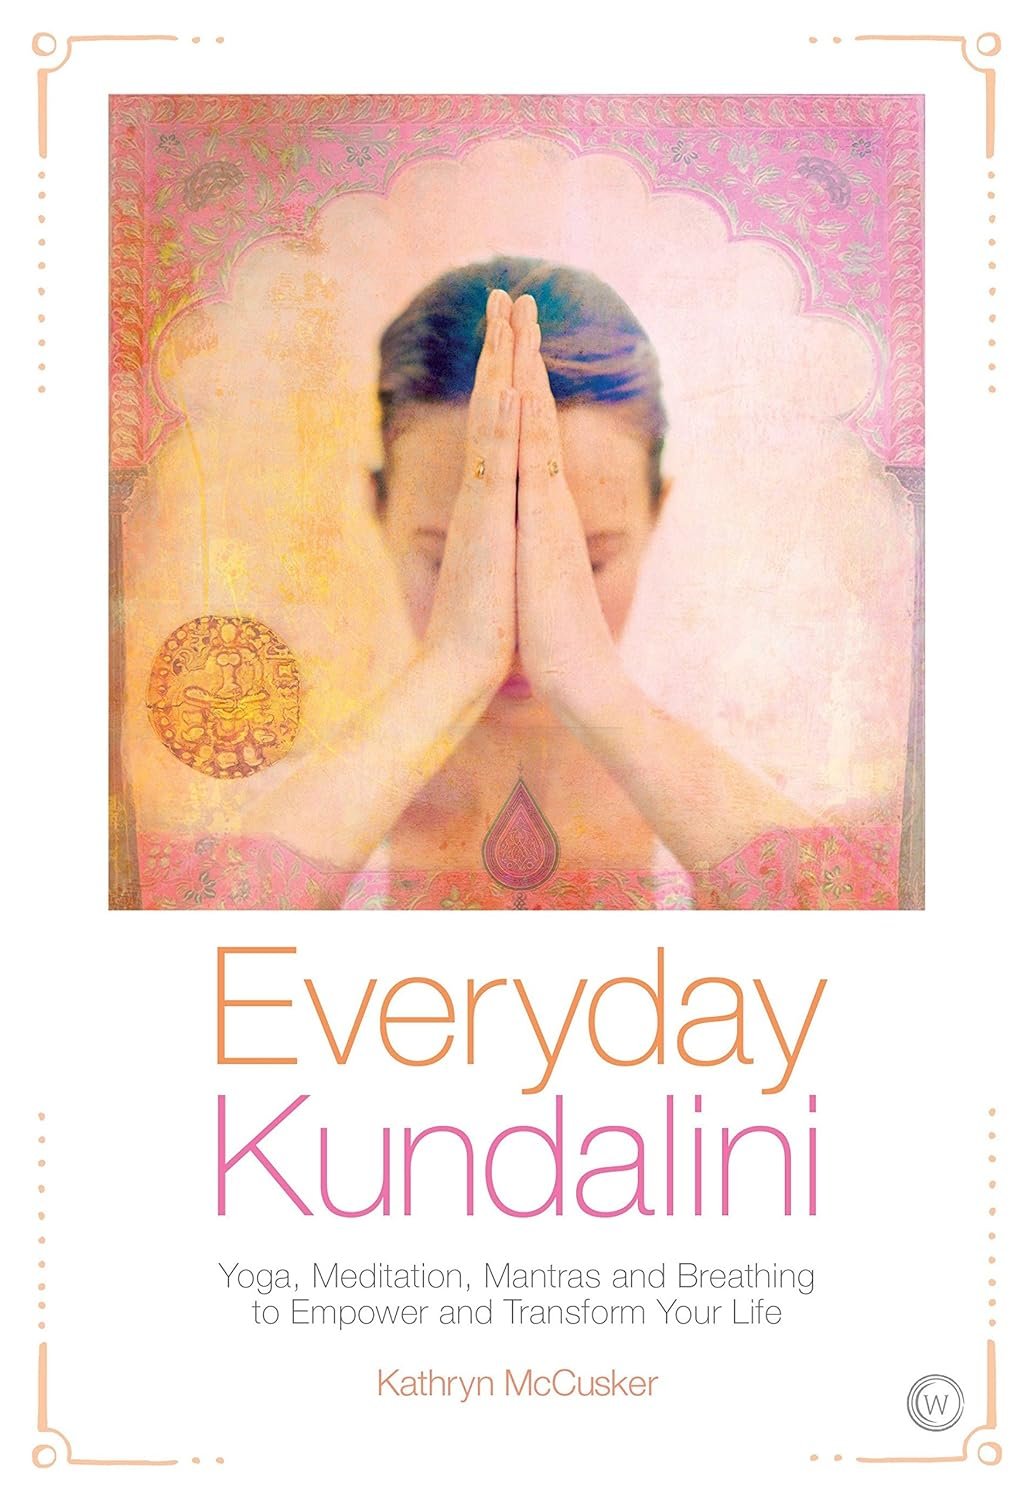 Everyday Kundalini: Yoga, Meditation, Mantras and Breathing to Empower and Transform Your Life